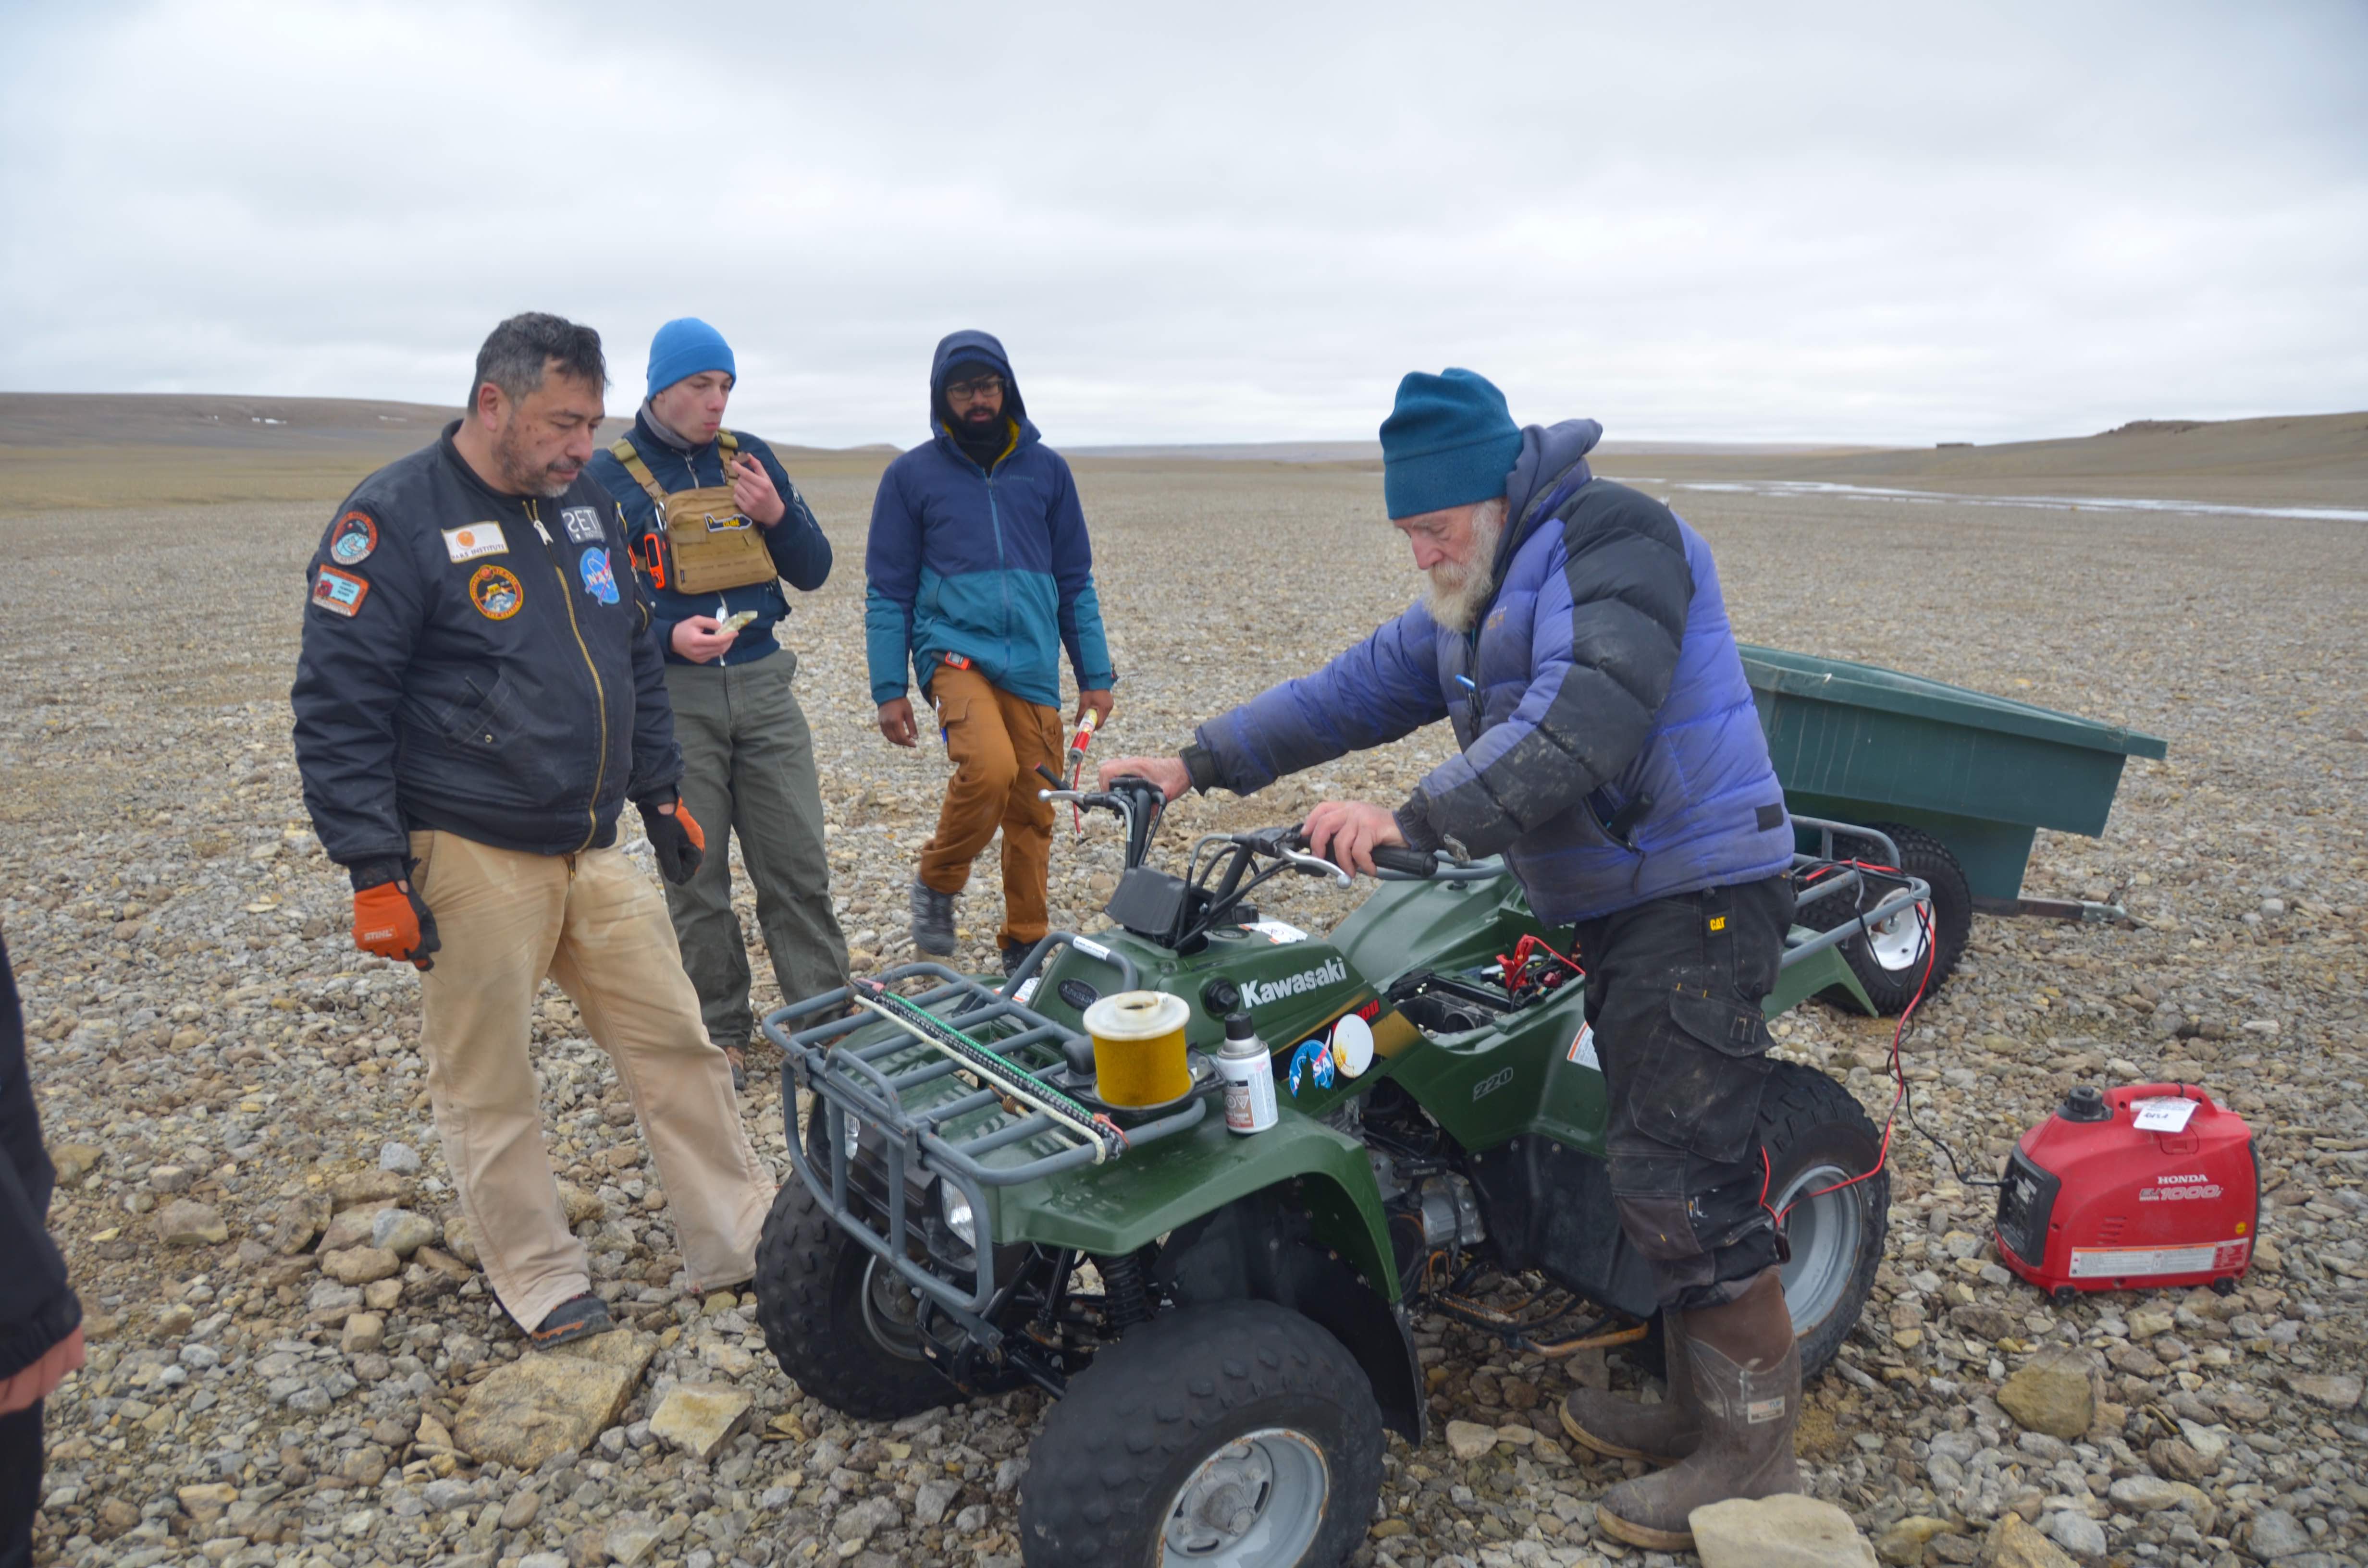 Three men watch another man on an ATV at the Haughton-Mars Project in the Arctic.